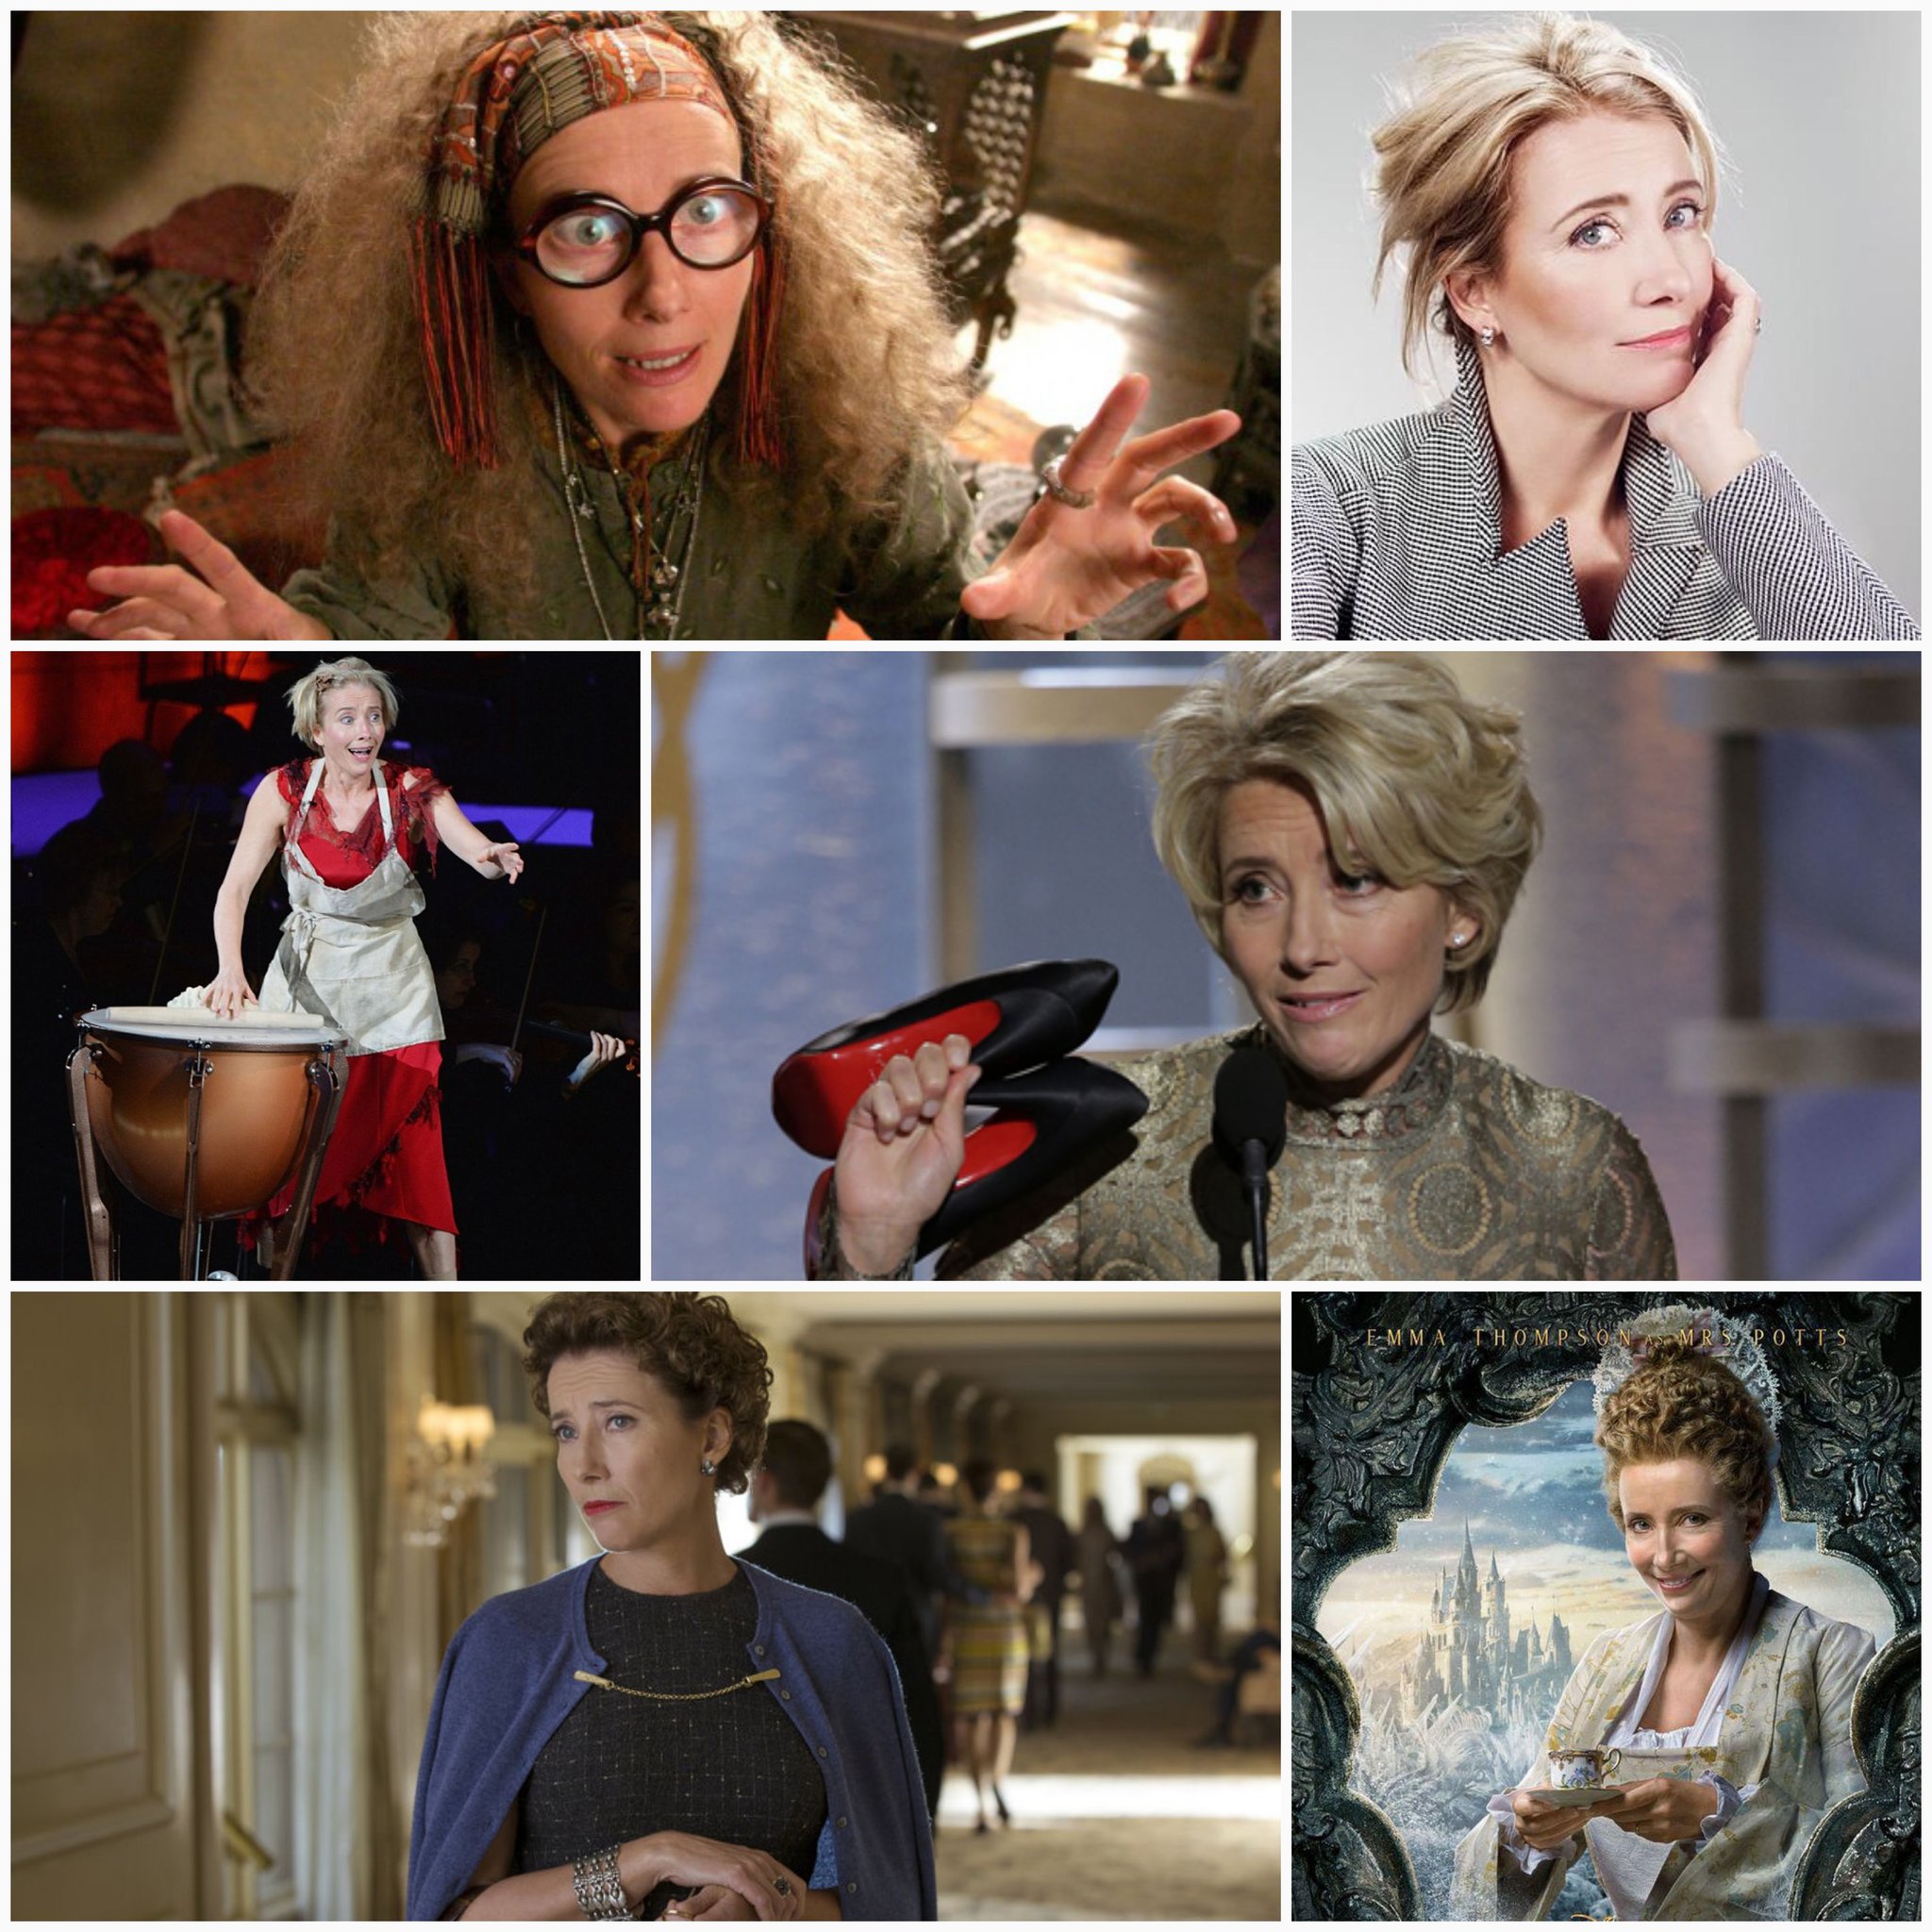 Also Happy Birthday to the great Emma Thompson! 